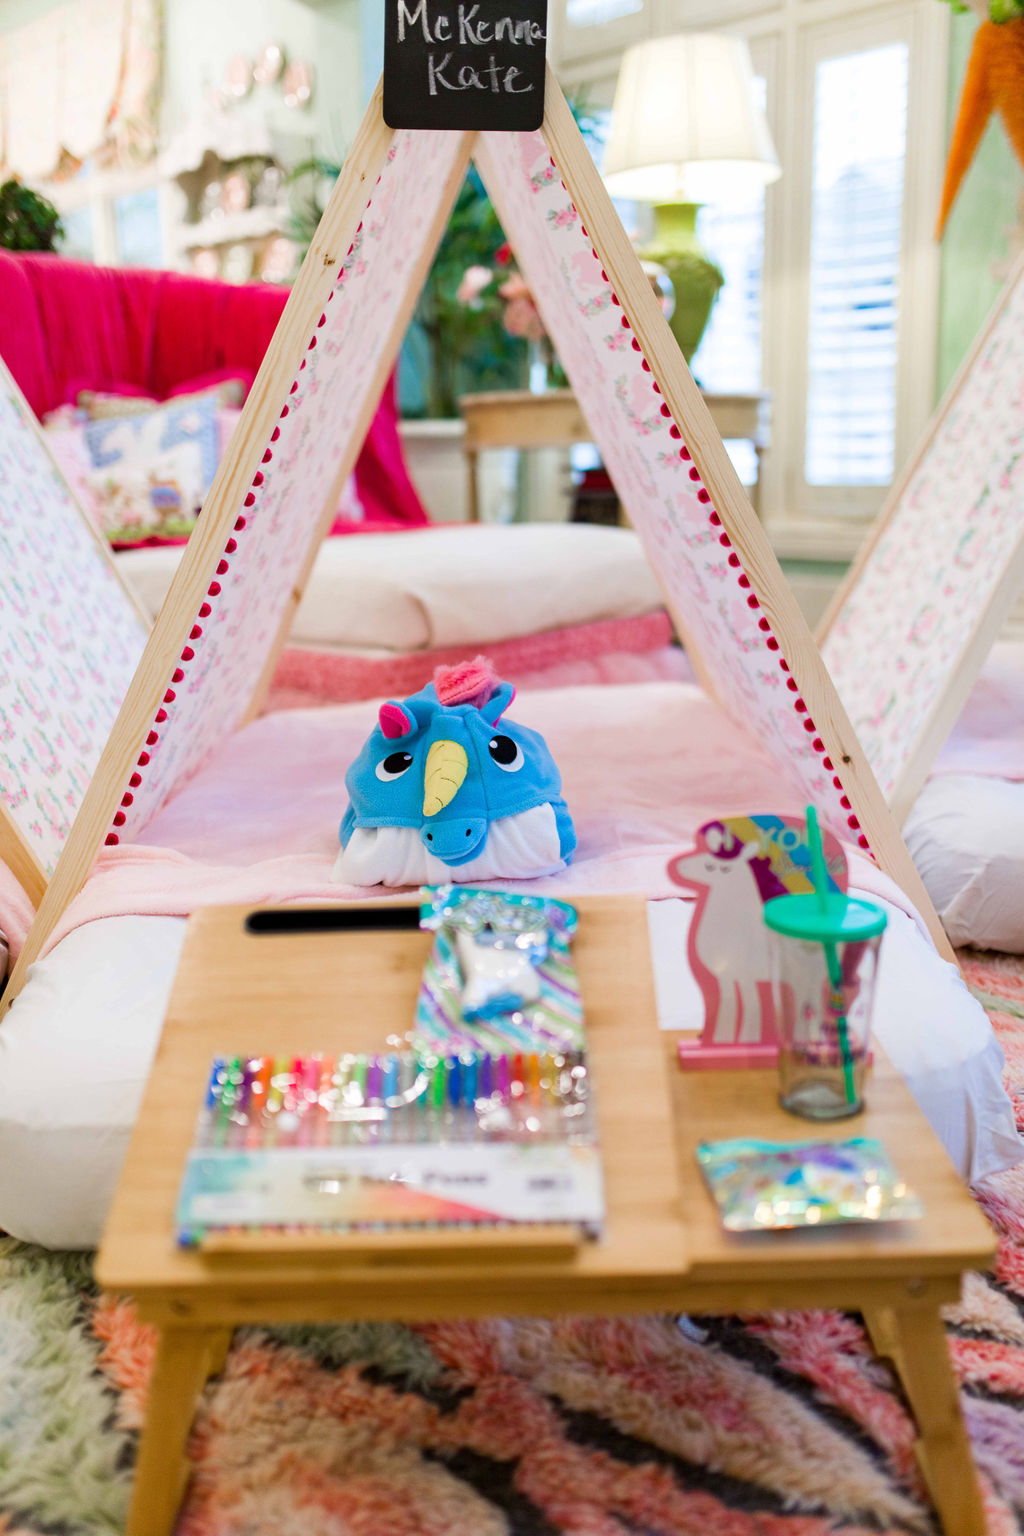 Turtle Creek Lane interior decorator shows how to do a unicorn birthday party with sleepover tents from Briarwood Design Co